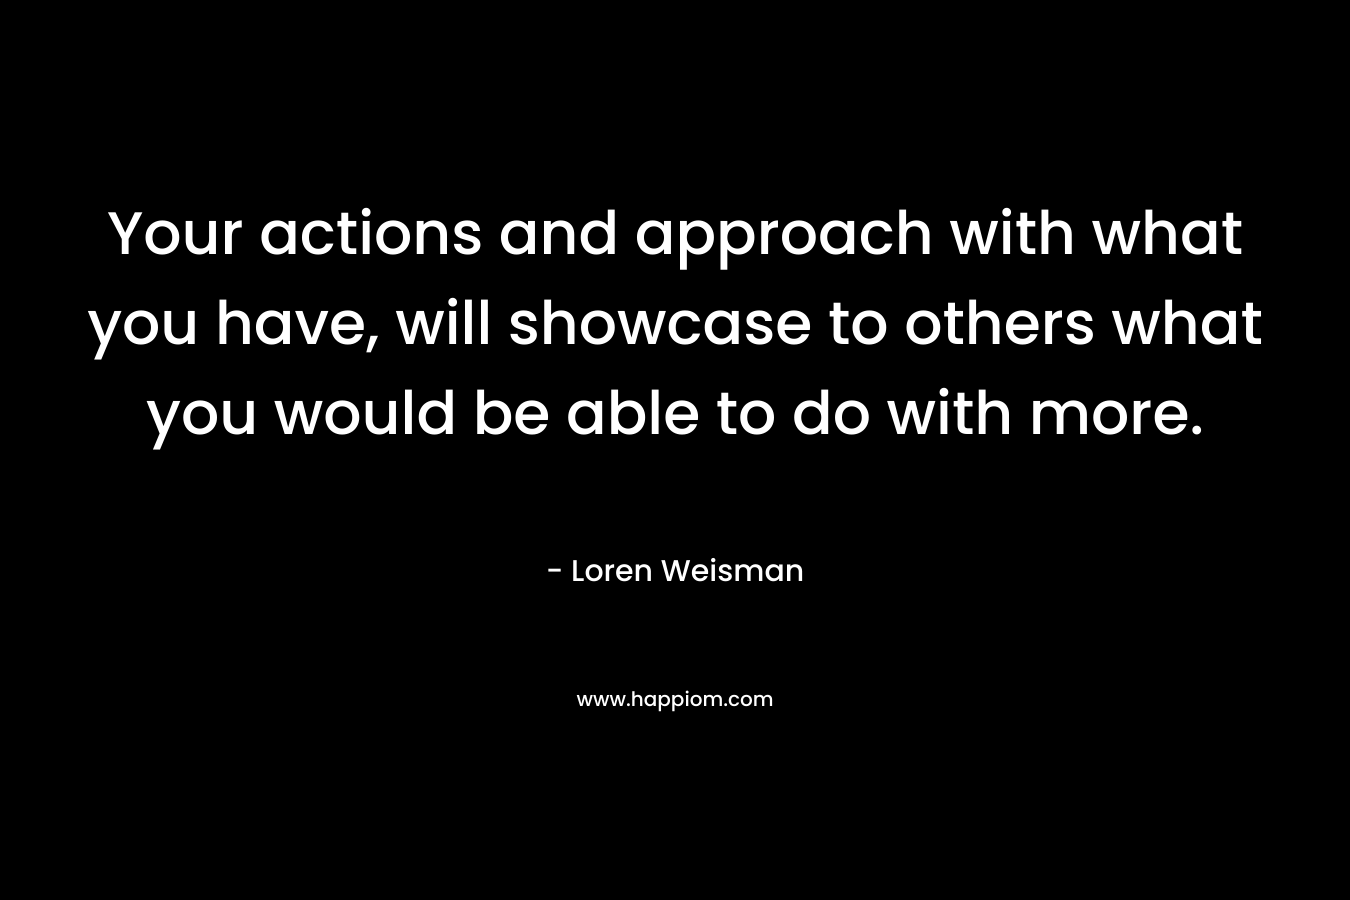 Your actions and approach with what you have, will showcase to others what you would be able to do with more.